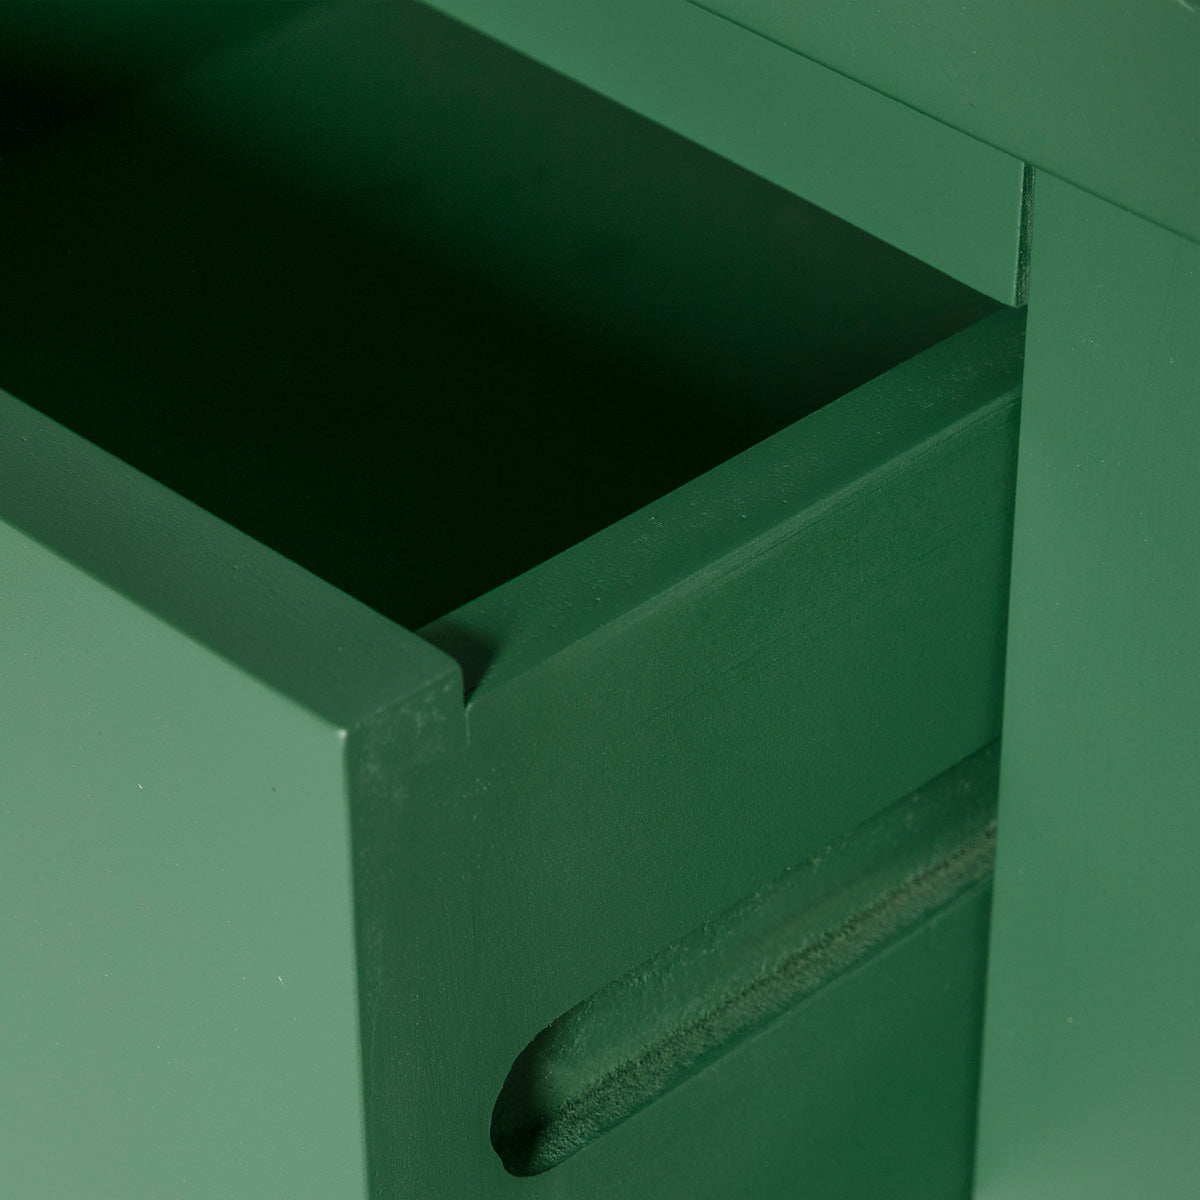 Manor Green 2 Drawer Bedside Table